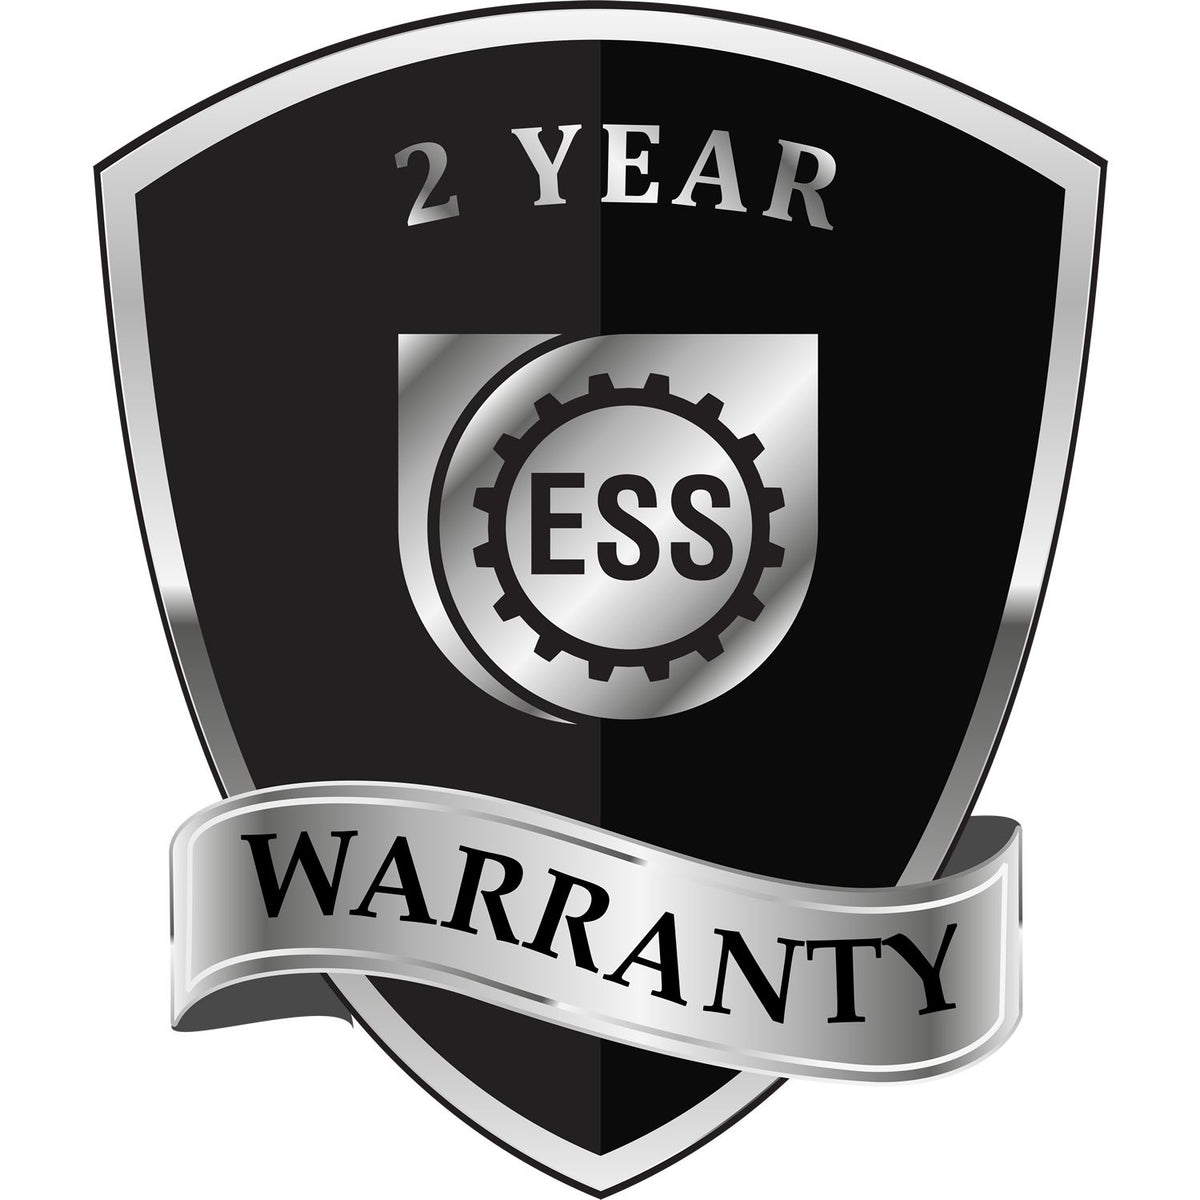 A badge or emblem showing a warranty icon for the Handheld Louisiana Professional Engineer Embosser